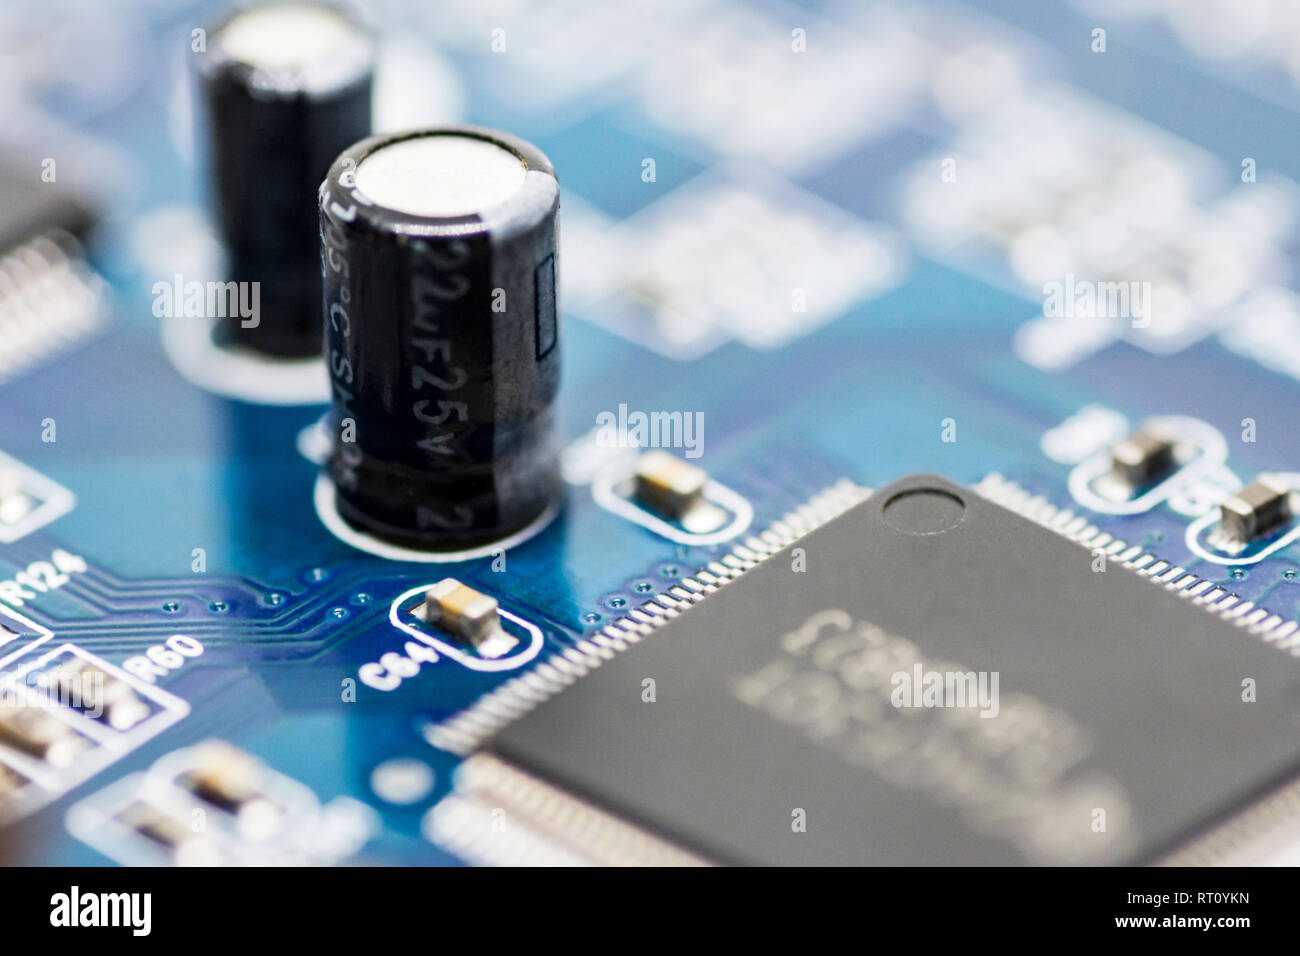 microchips and circuits on a board Stock Photo